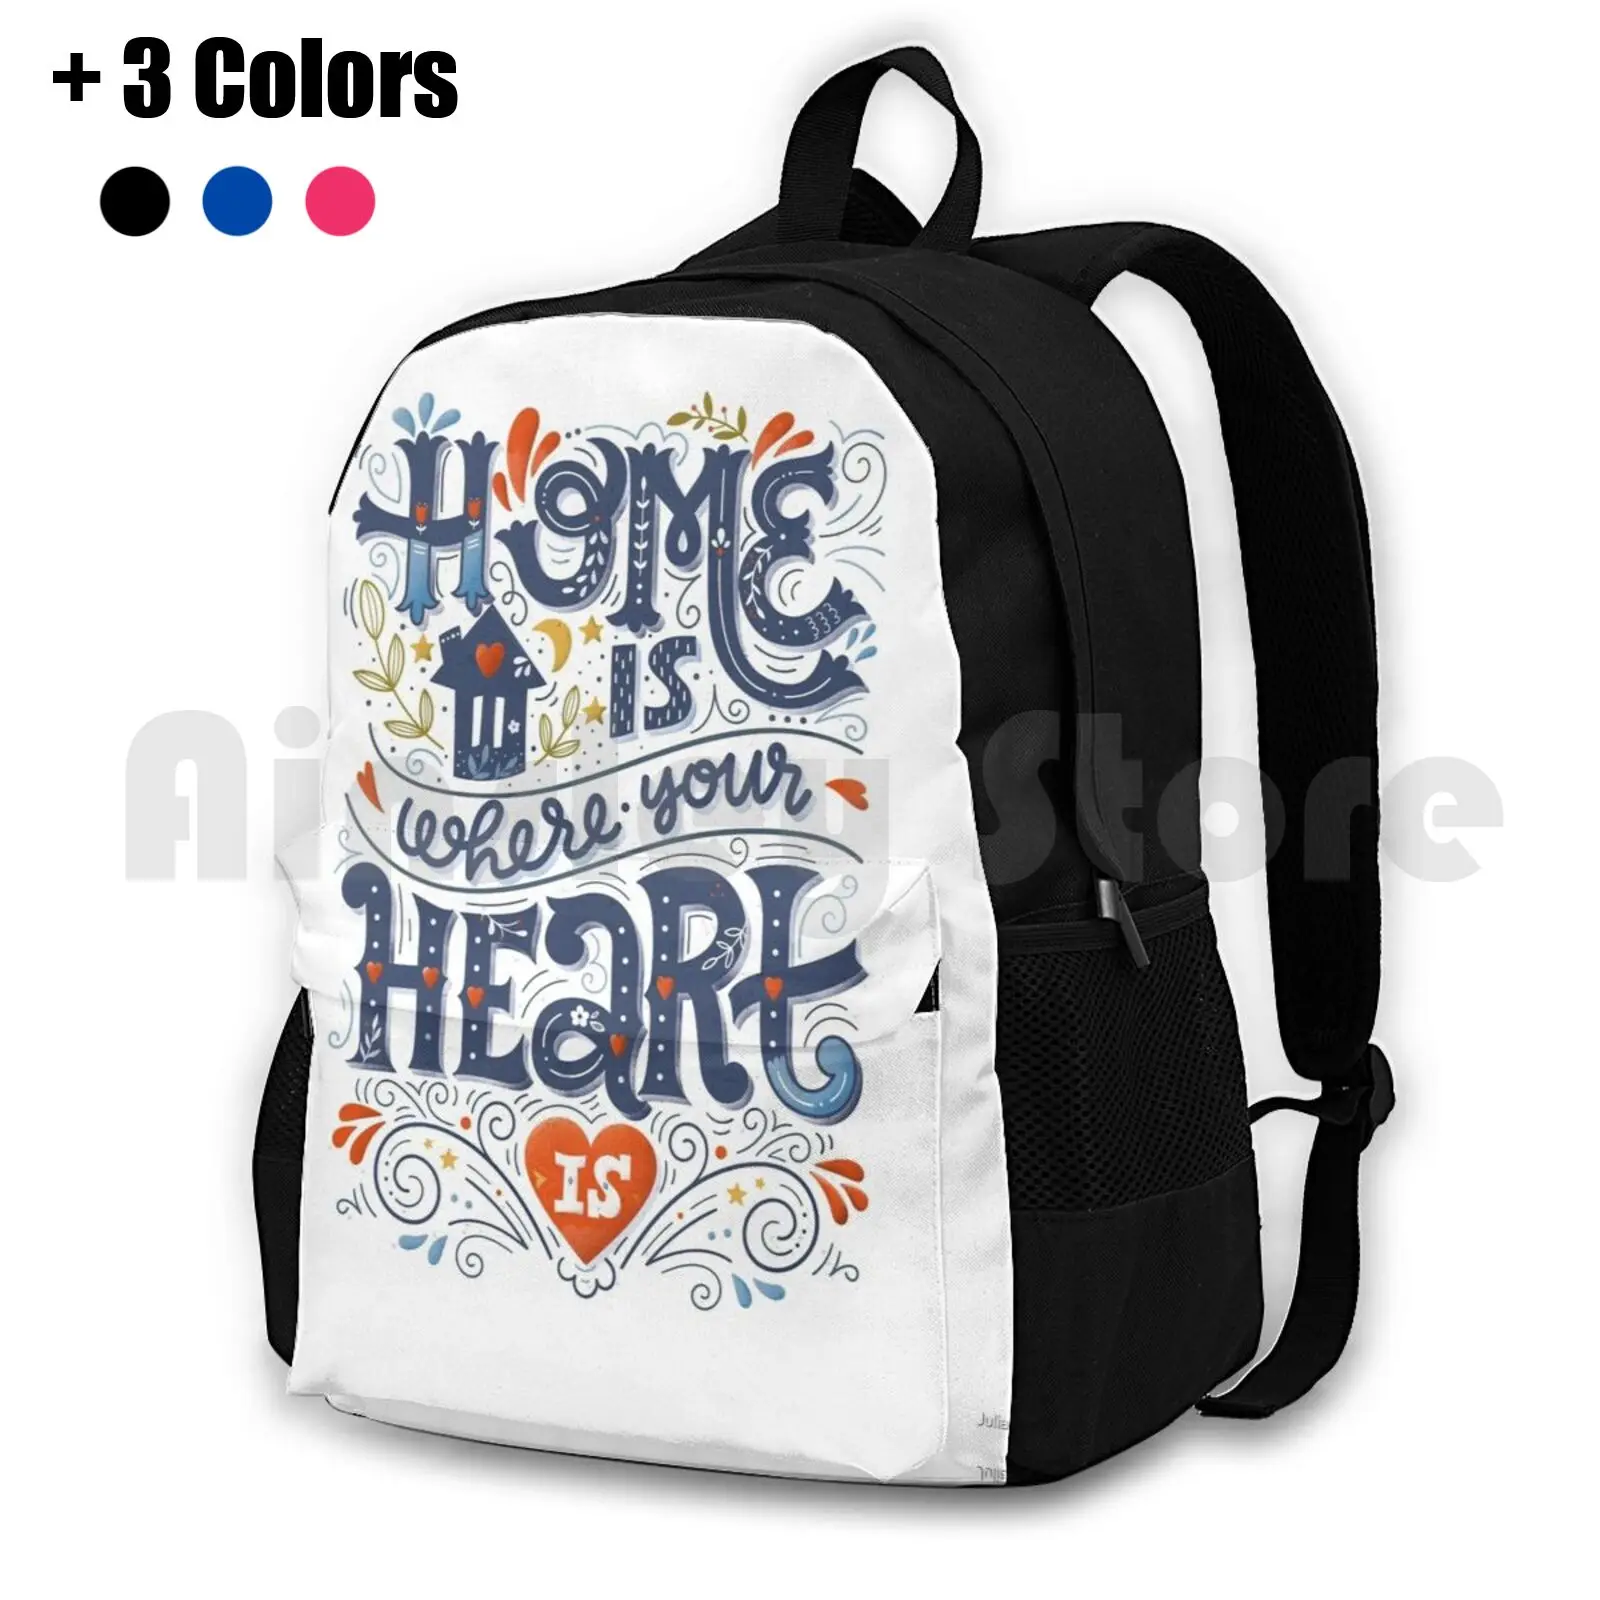 

Home Is Where Your Heart Is Outdoor Hiking Backpack Riding Climbing Sports Bag Home Lettering Typography Graphic Type